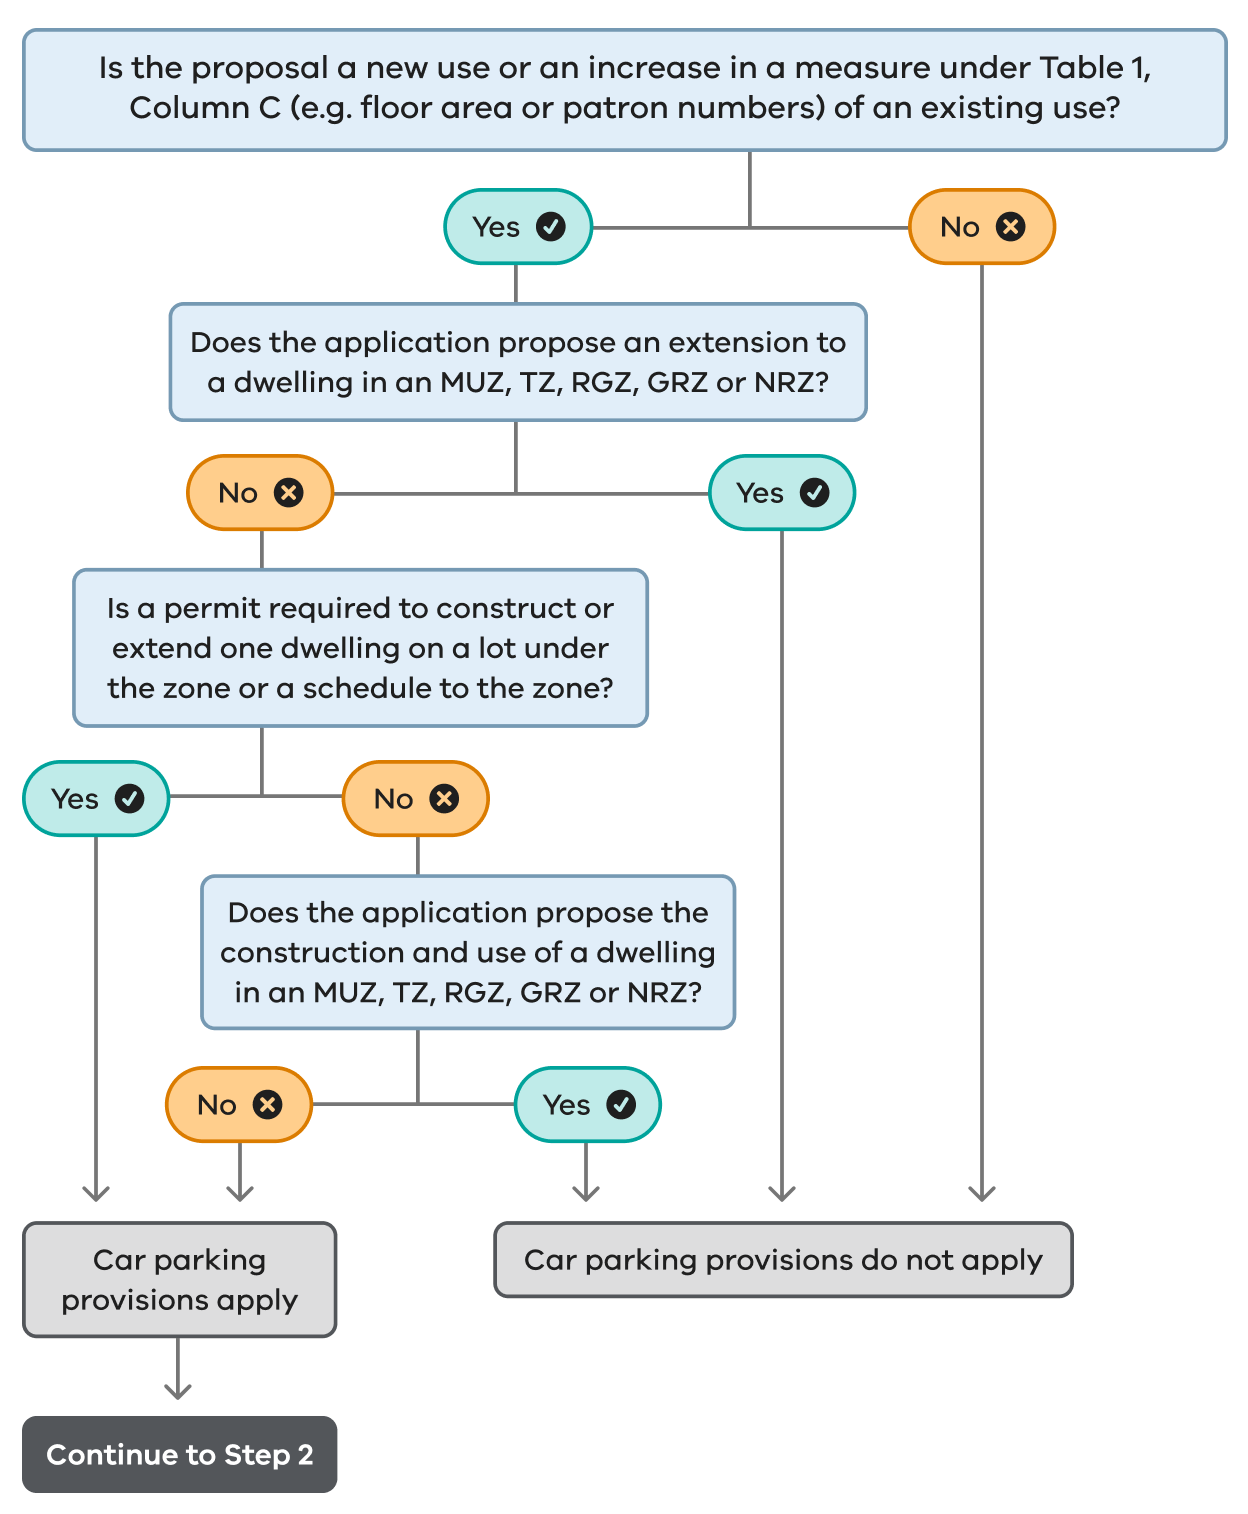 Diagram 1. Step 1 flow chart to determine if the car parking provisions apply